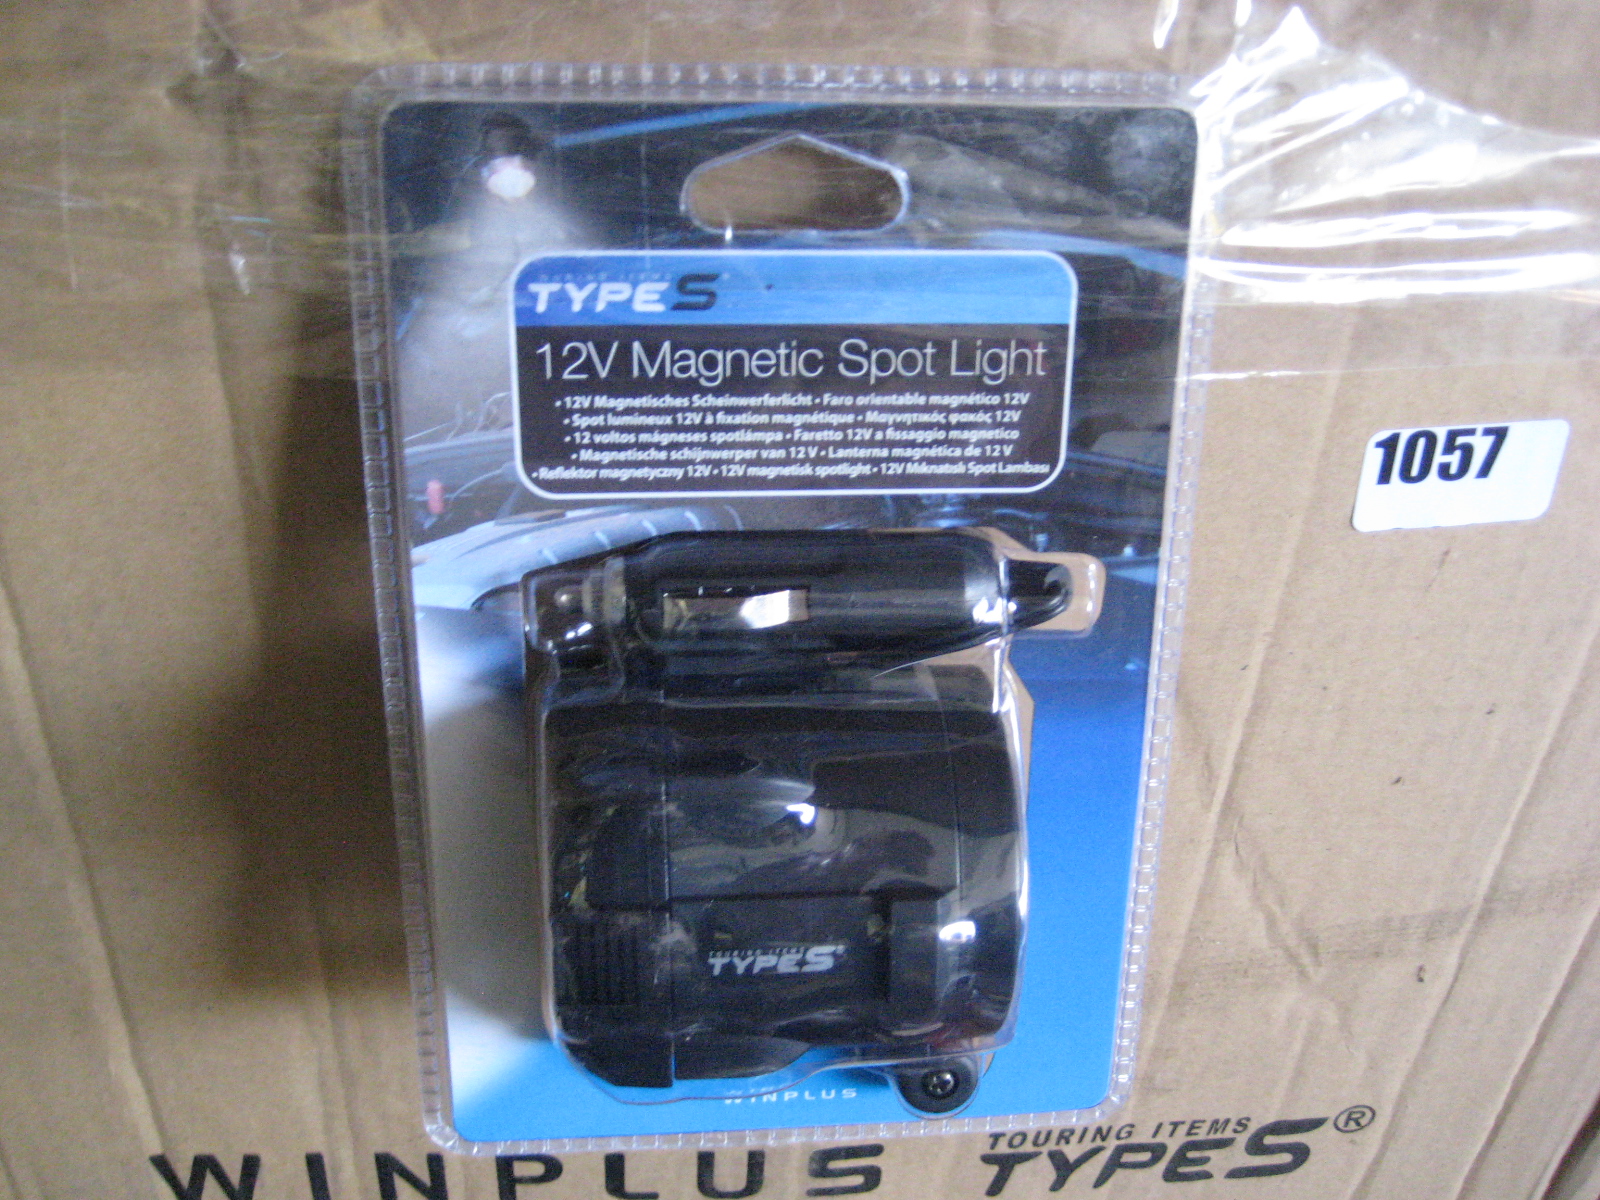 Box containing Type-S 12v magnetic spotlights